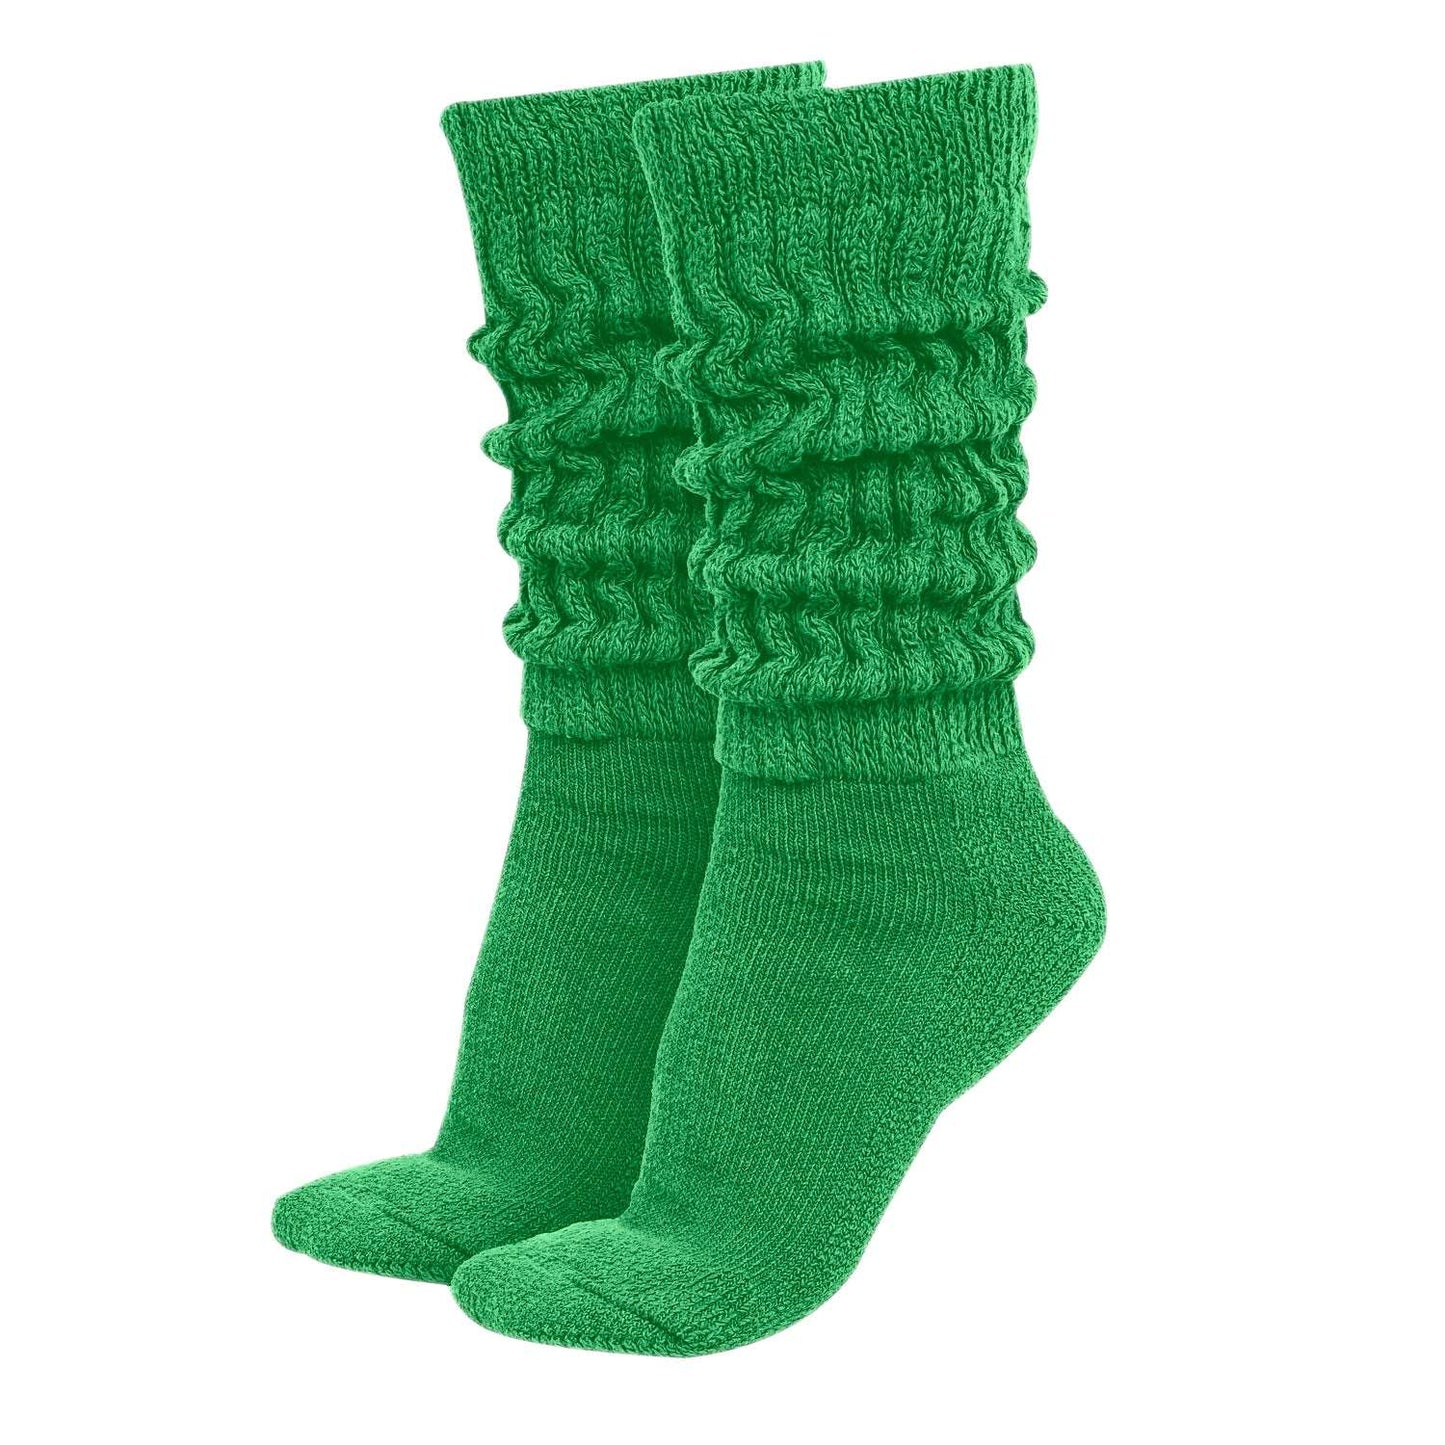 MDR Distirbutors Women's Extra Long & Heavy Slouch Cotton Wear at any Length Socks Made in USA 1 Pair Size 9 to 11